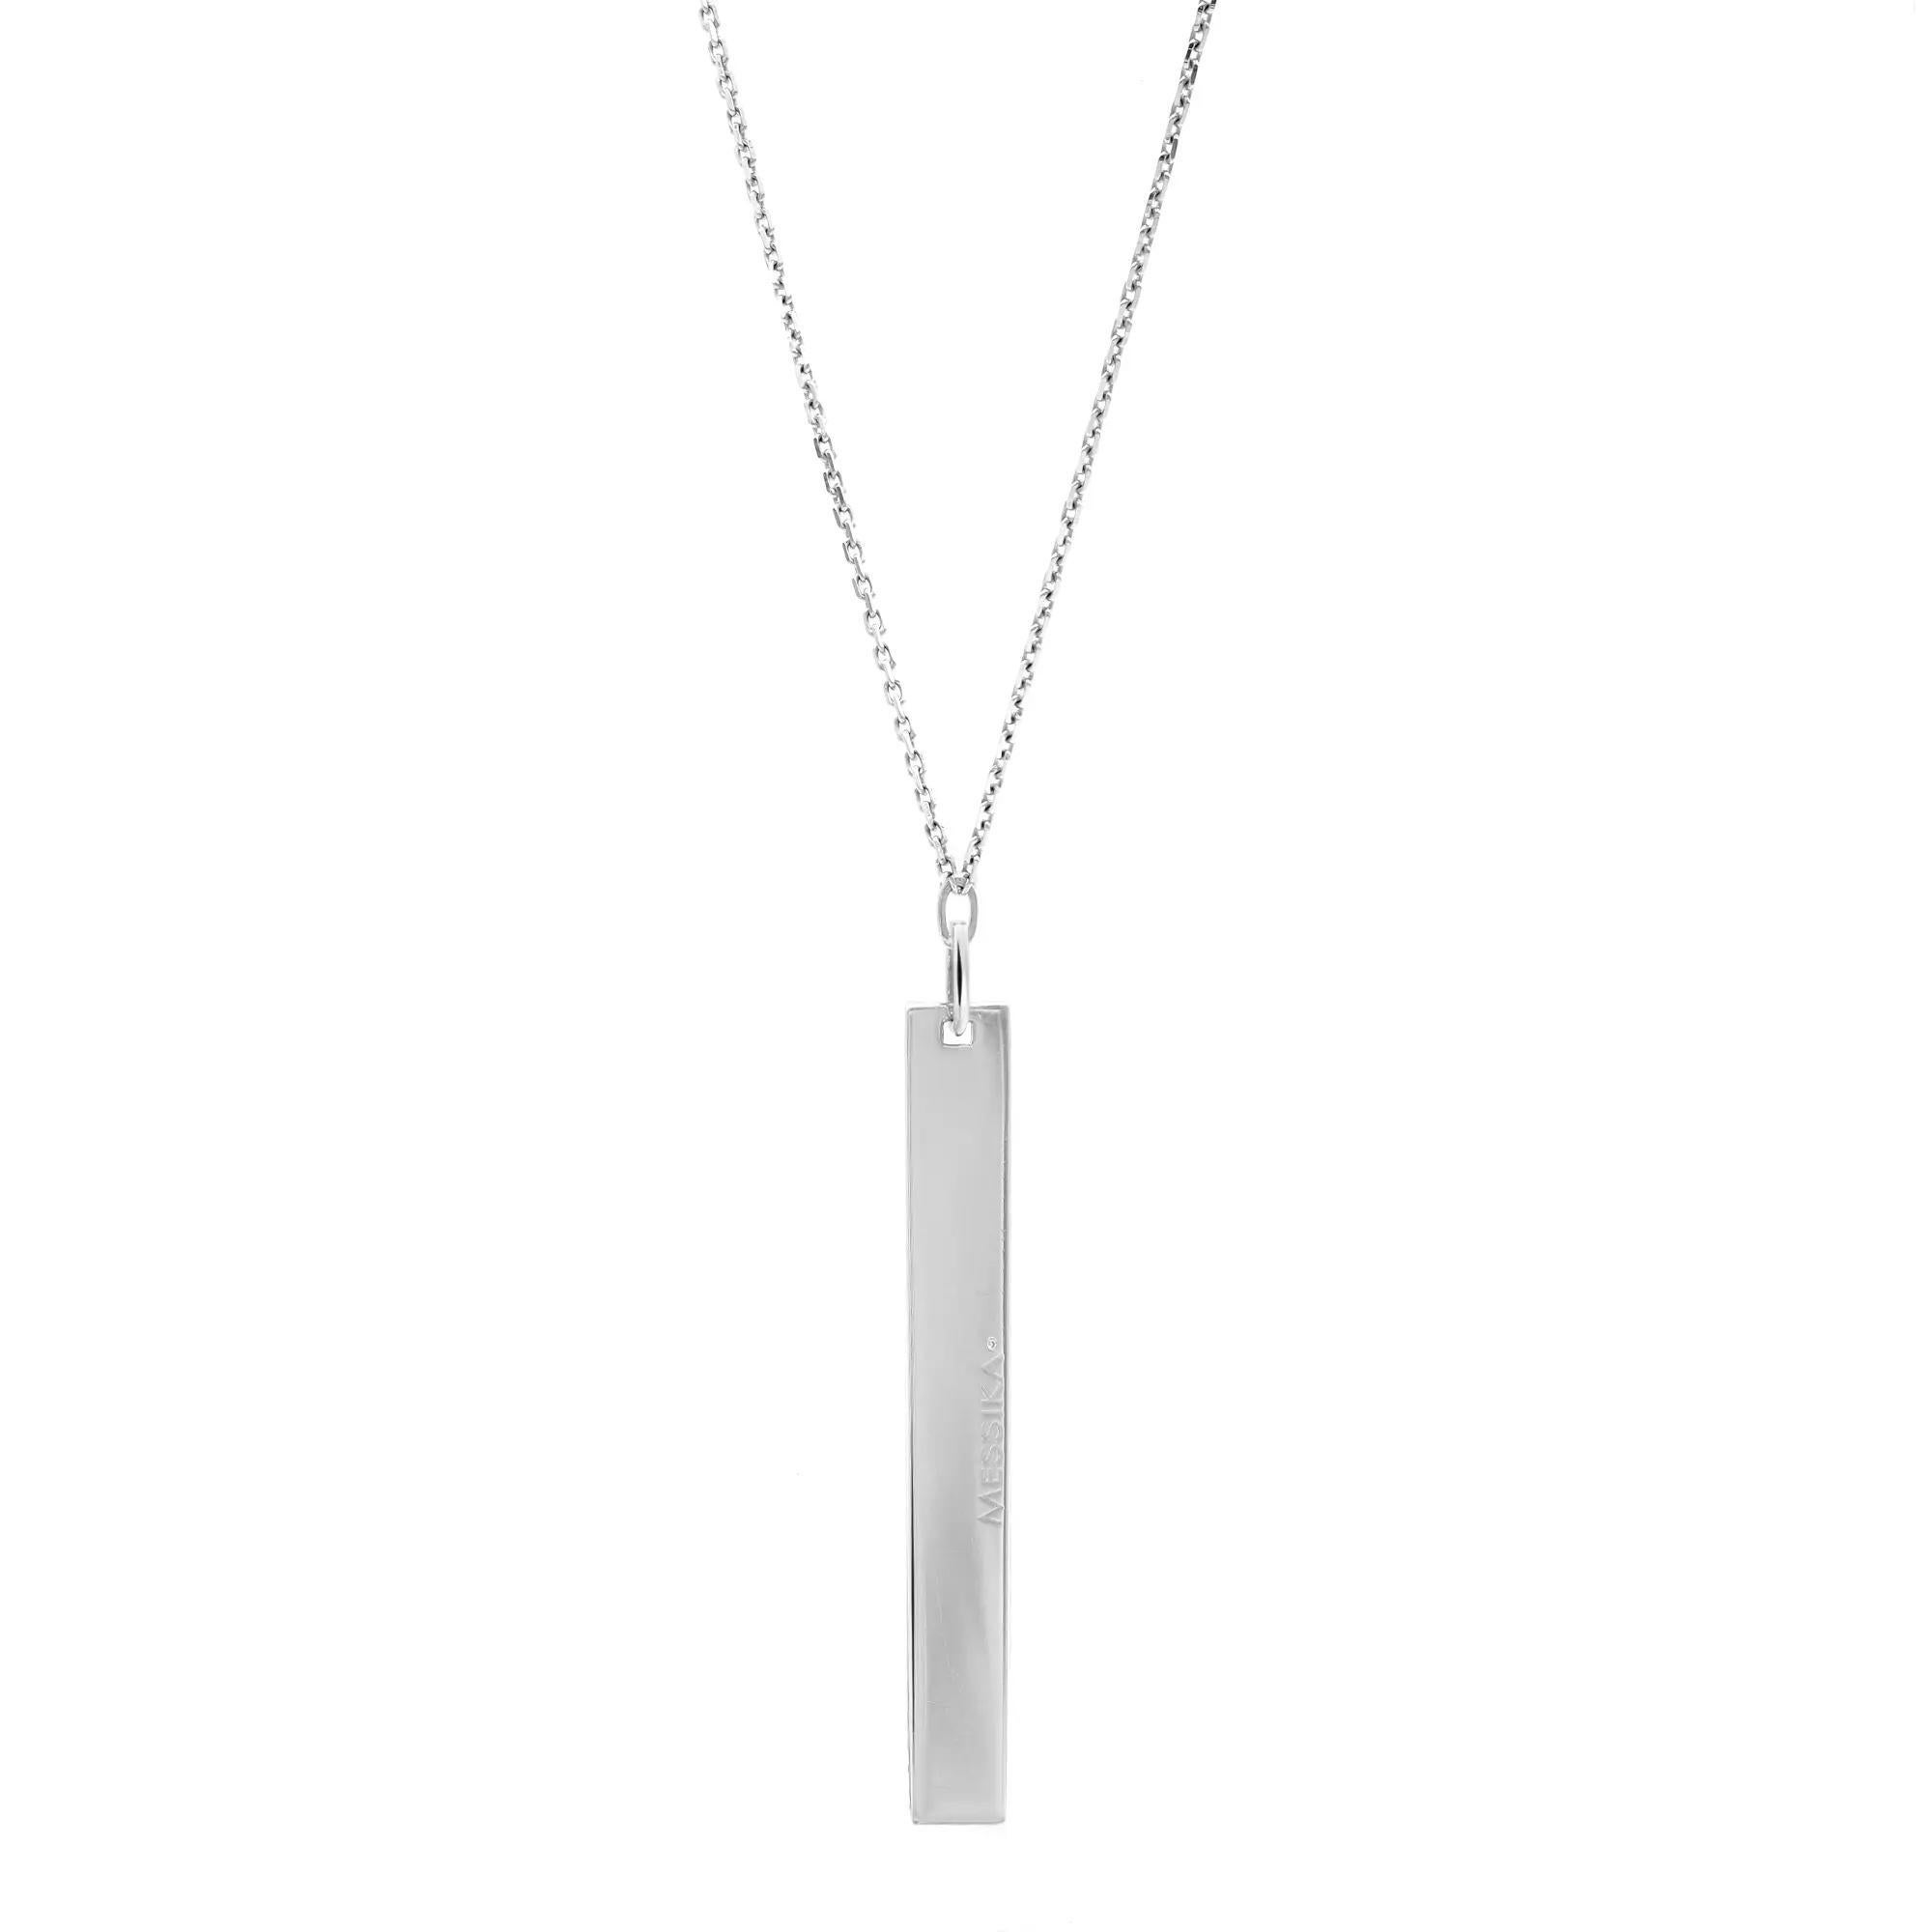 This gorgeous Messika Sautoir Kate diamond vertical bar pendant necklace is crafted in highly polished 18K white gold. Featuring pave set round brilliant cut diamonds encrusted in a vertical row with a diamond studded oval link. Diamond quality: G